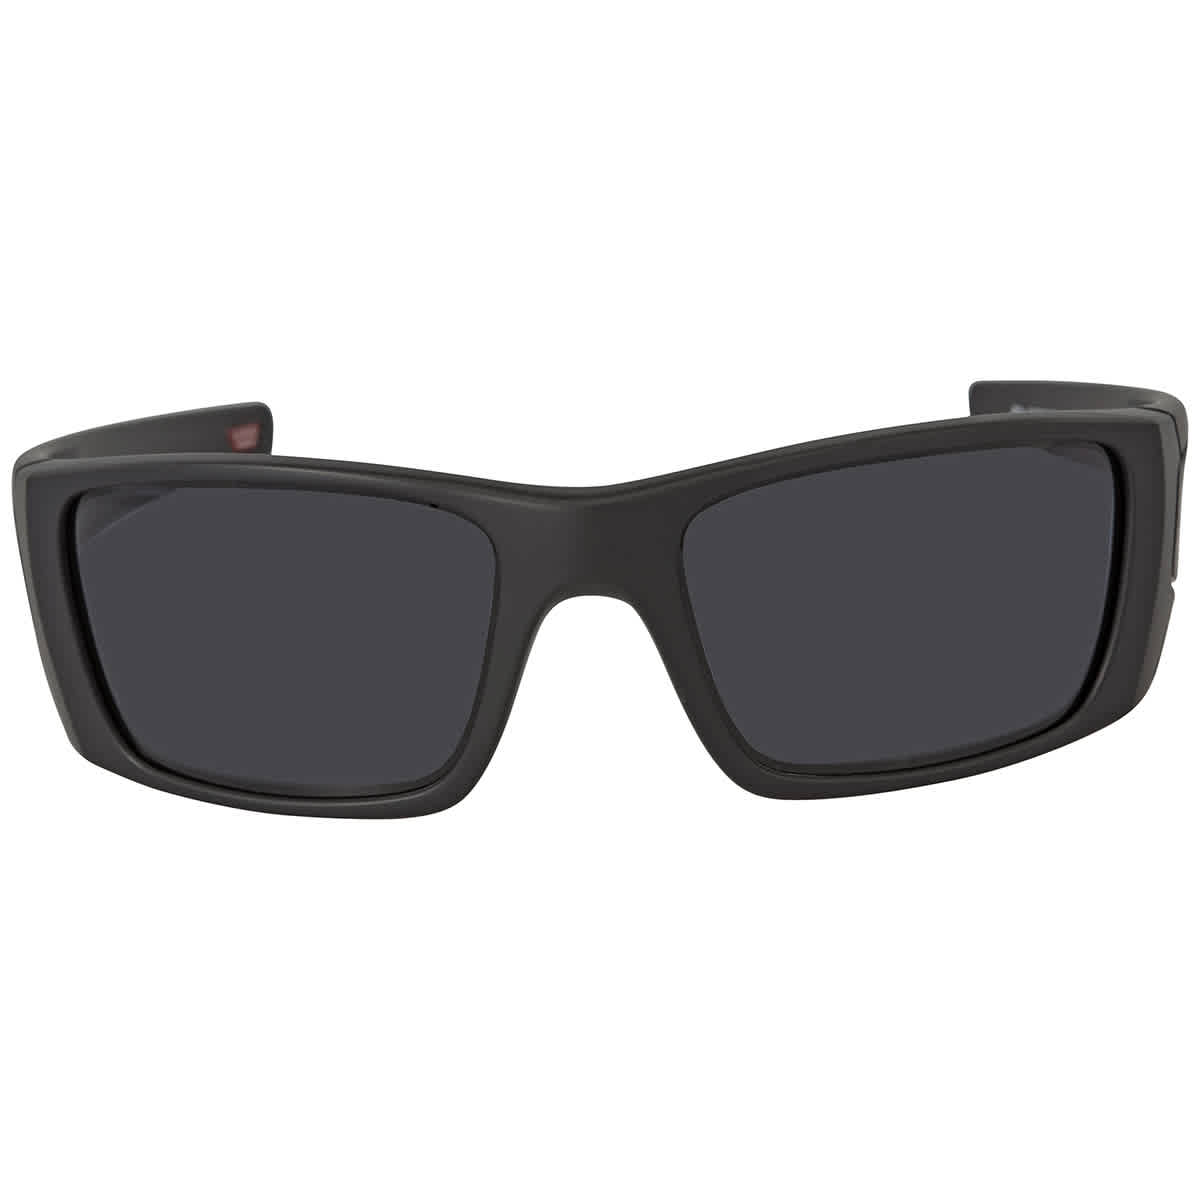 Oakley SI Fuel Cell Grey Wrap Men's Sunglasses OO9096 909638 60 - image 1 of 6